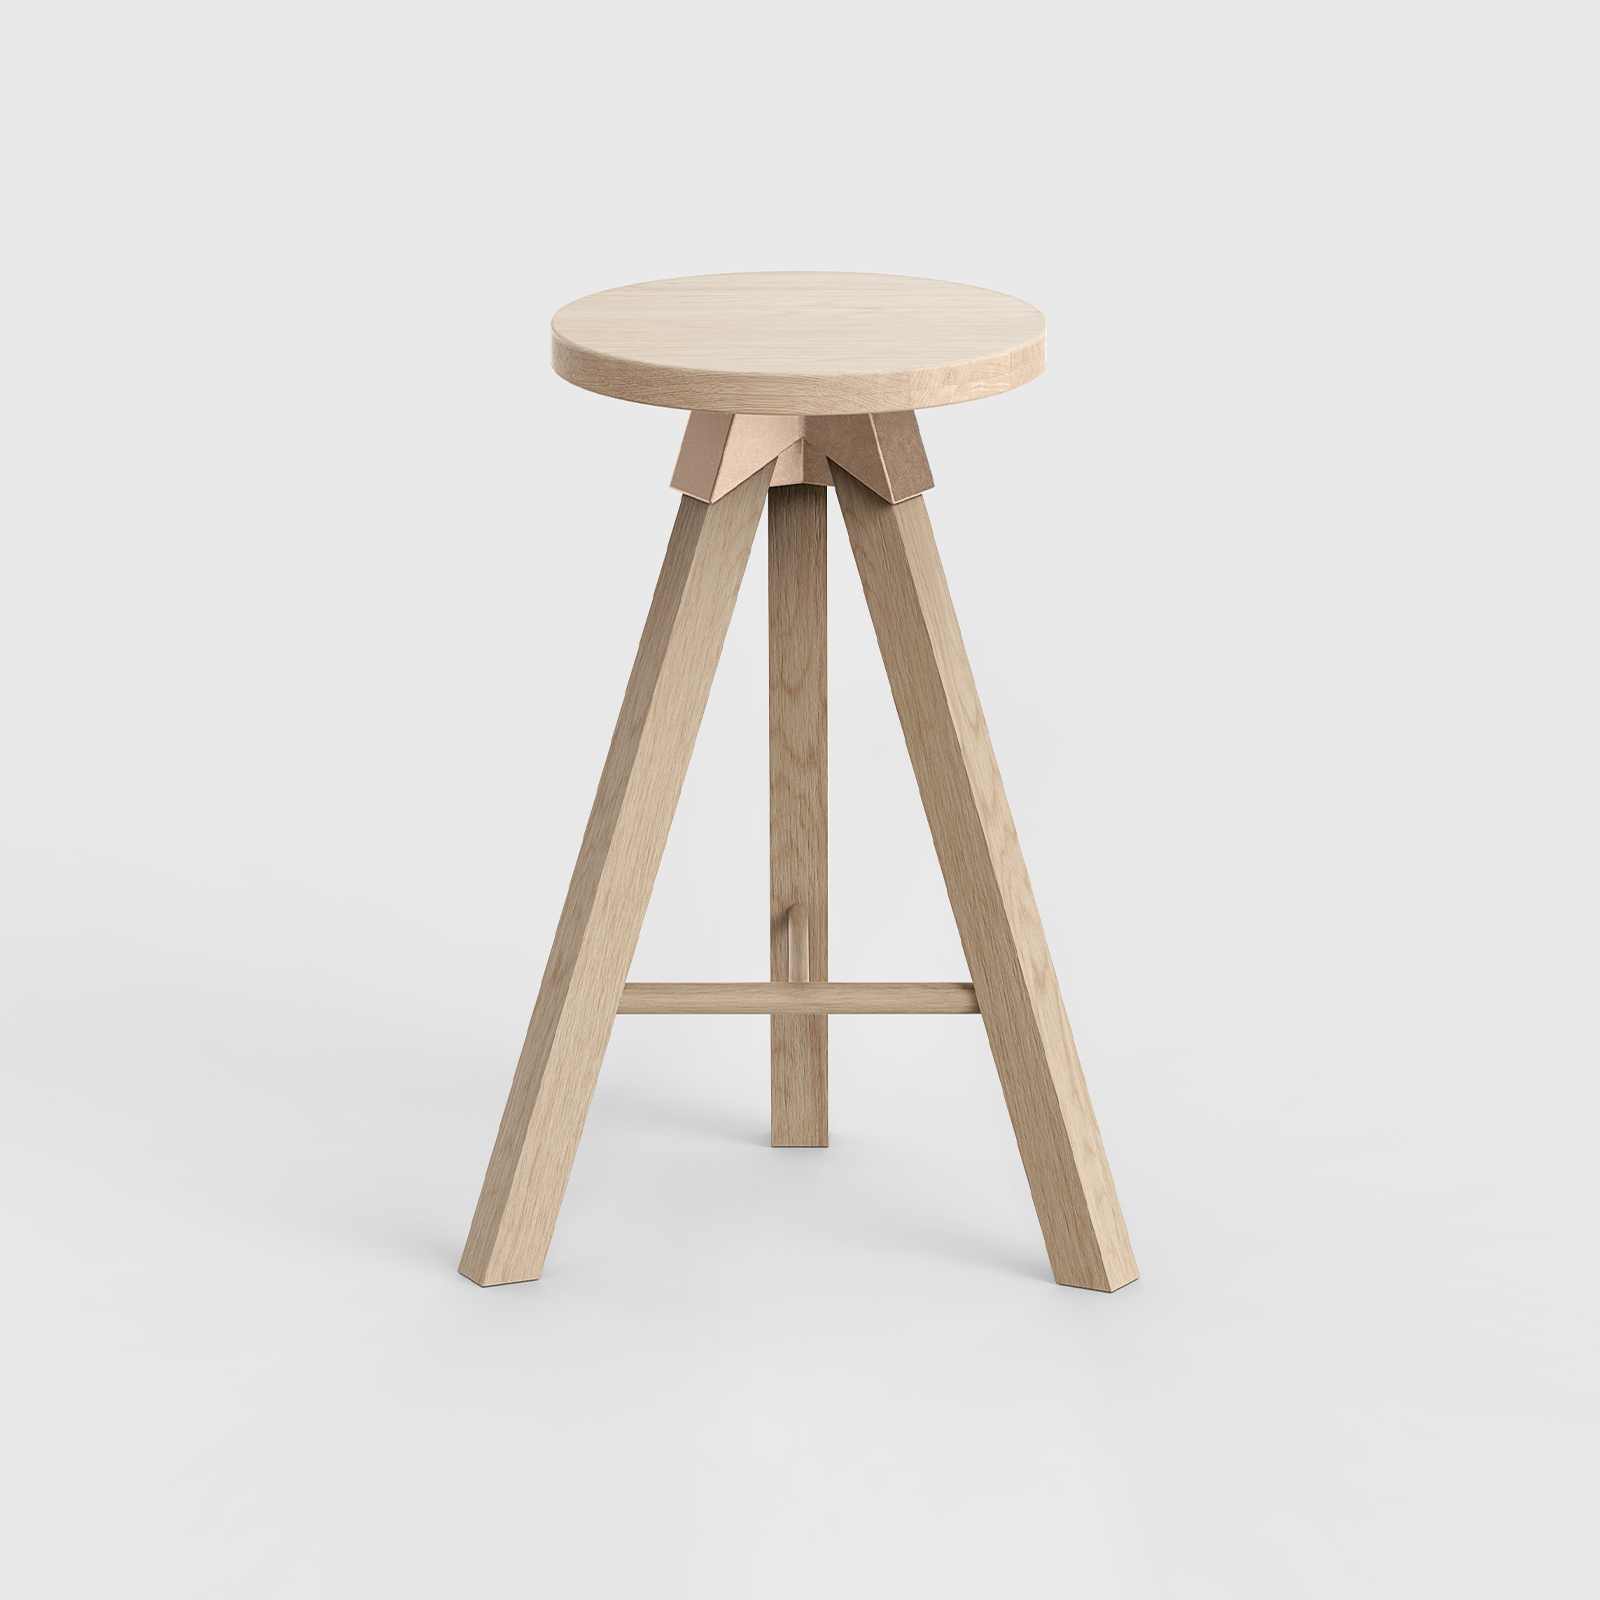 A-joint tall stool in solid American Oak with cast bronze A-joint